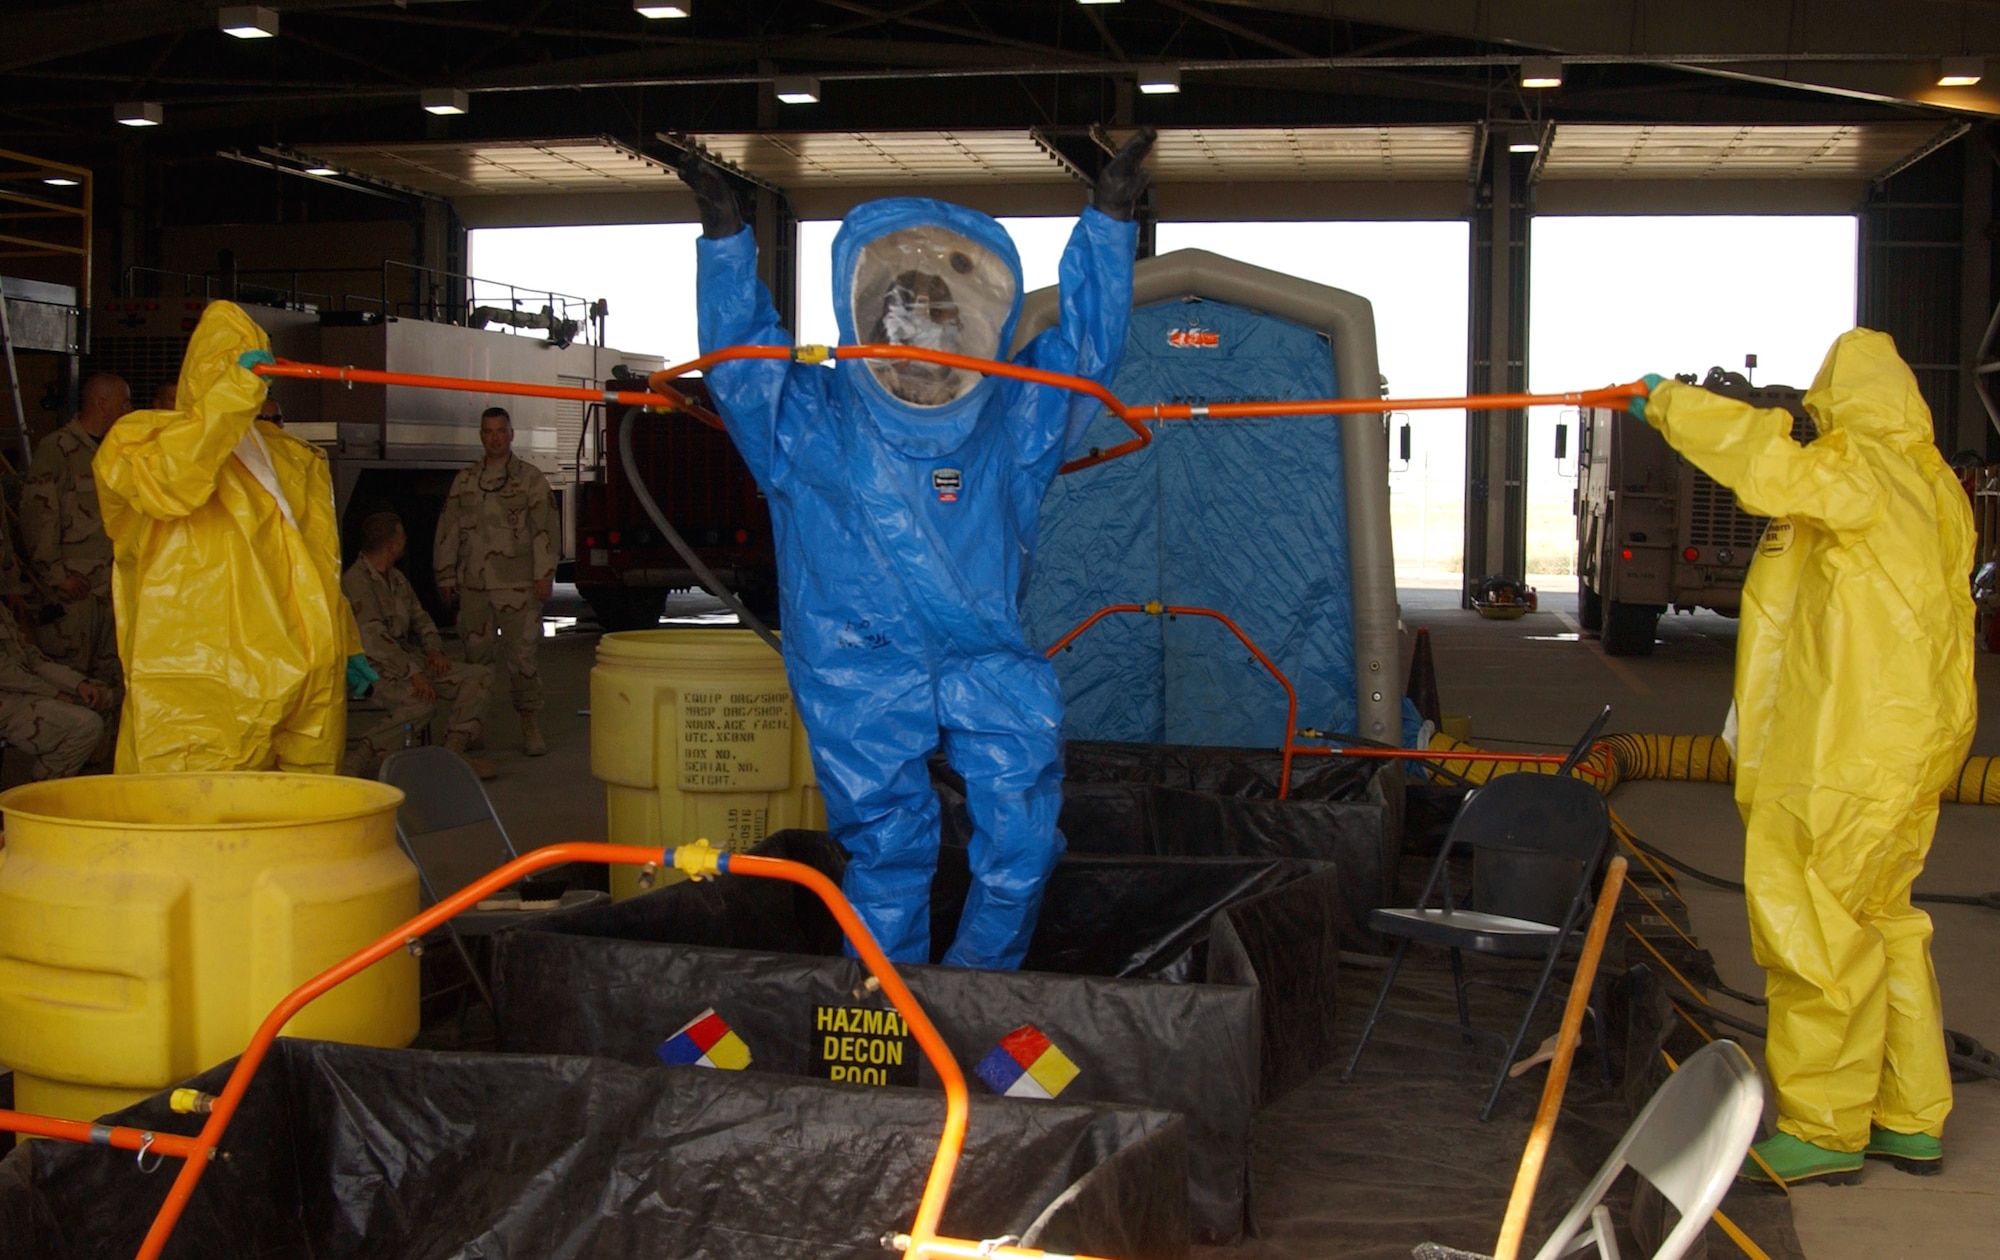 Army Spc. Michael Harms (left) and Airman 1st Class Jace Correa, in yellow Level B suits, raise and lower a decontamination shower ring as Airman 1st Class Glenn Rodgers, in a blue Level A suit, simulates a contaminated firefighter during a training exercise June 5 at Balad Air Base, Iraq. The firefighters set up a hazardous-material decontamination line and practiced so that they would be able to quickly respond to any real-world threat within 10 minutes. The servicemembers are firefighters with the 332nd Expeditionary Civil Engineer Squadron Fire and Emergency Services Flight. (U.S. Air Force photo/1st Lt. Shannon Collins)